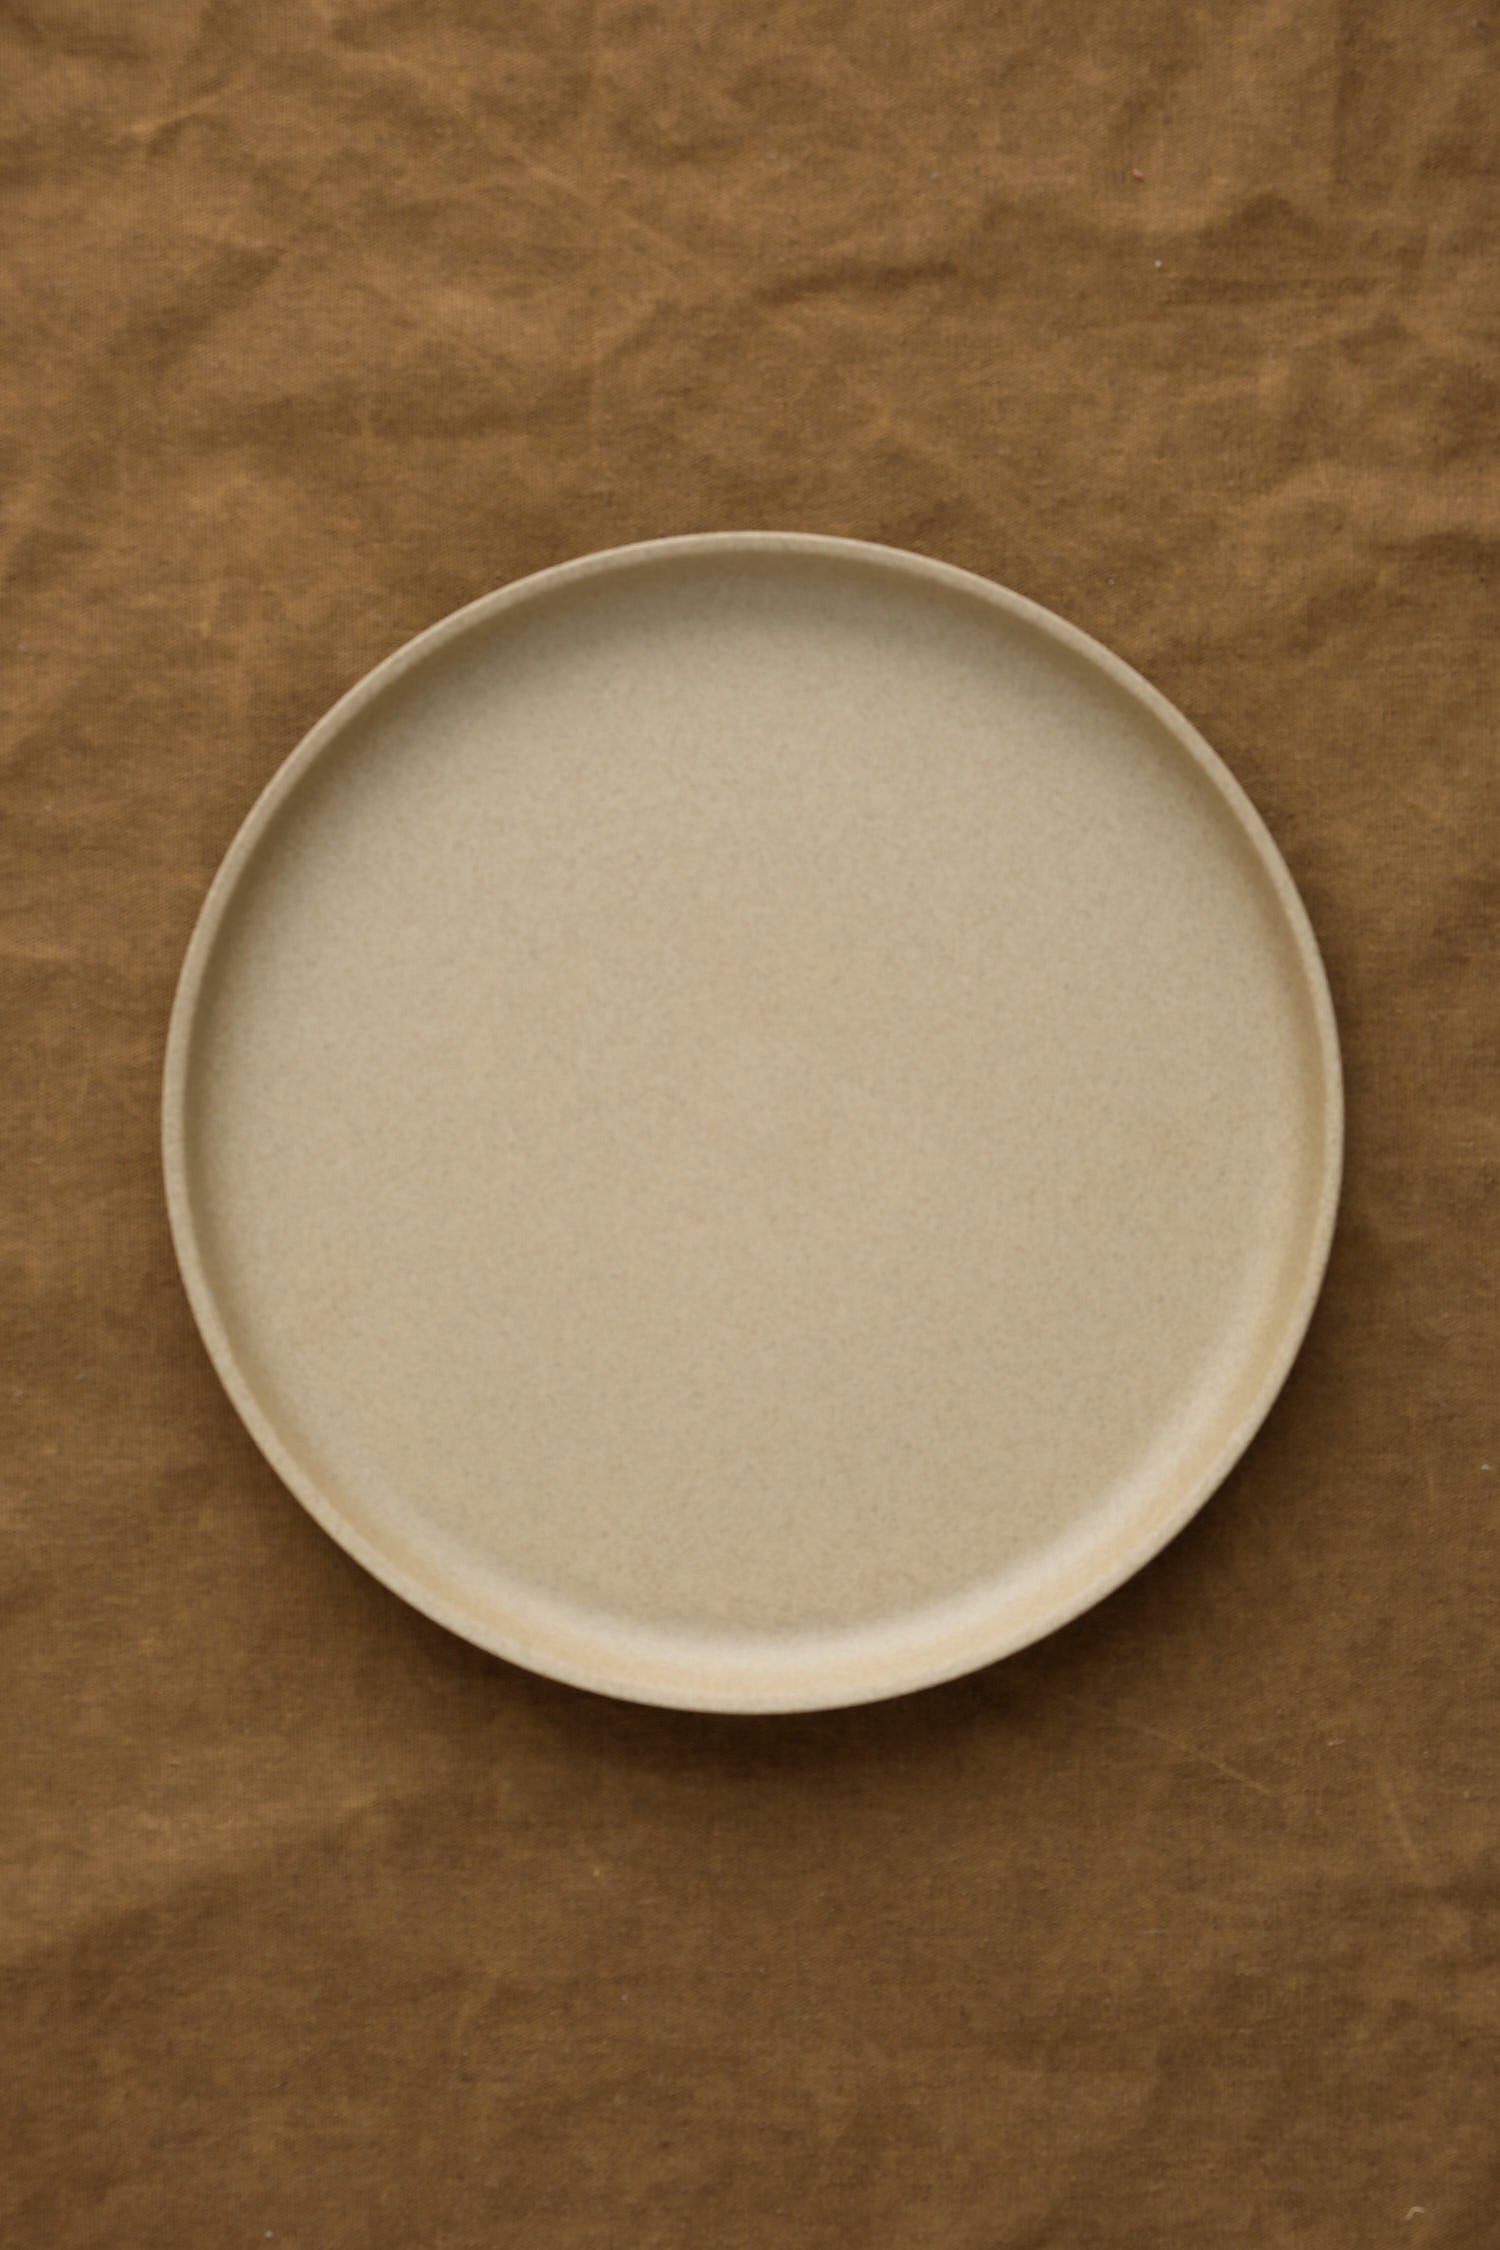 8.5" Small Plate on table